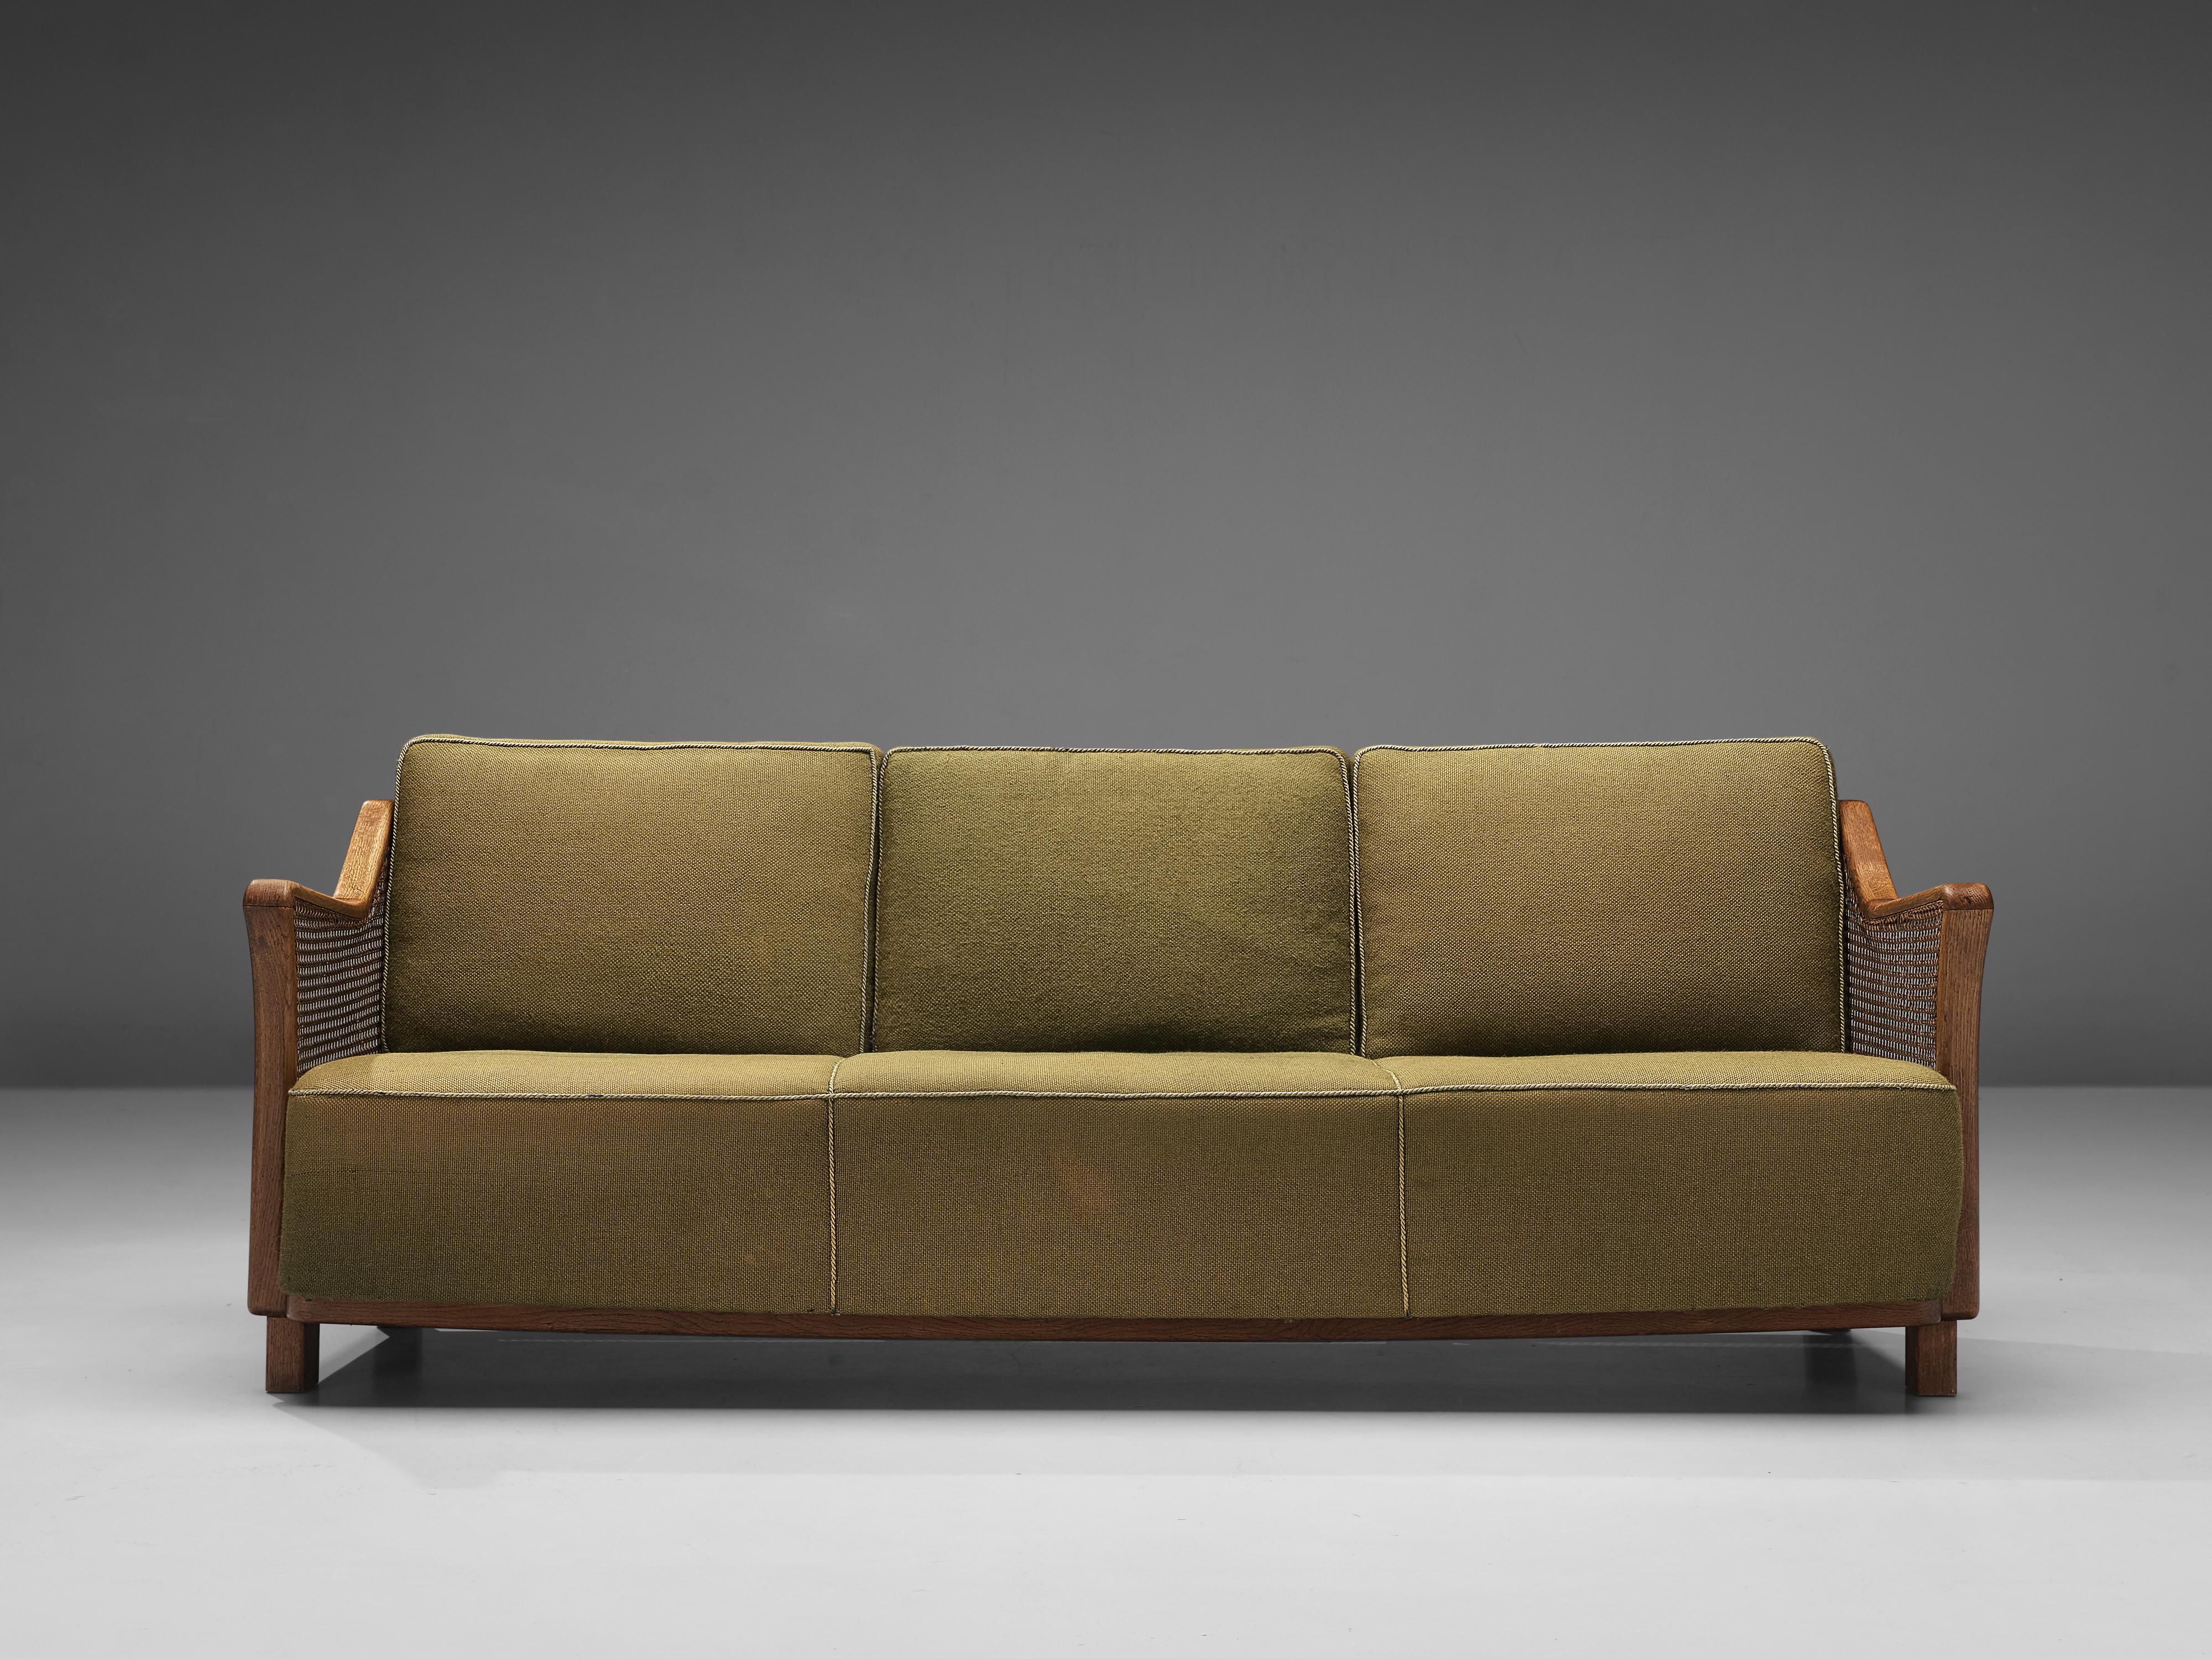 Sofa, cane and oak, France, 1960s

The design of this stunning sofa features beautiful, clear lines, contributing to a sculptural appearance. The frame of the slightly titled backrest and armrests are executed in rattan. The structure, on the